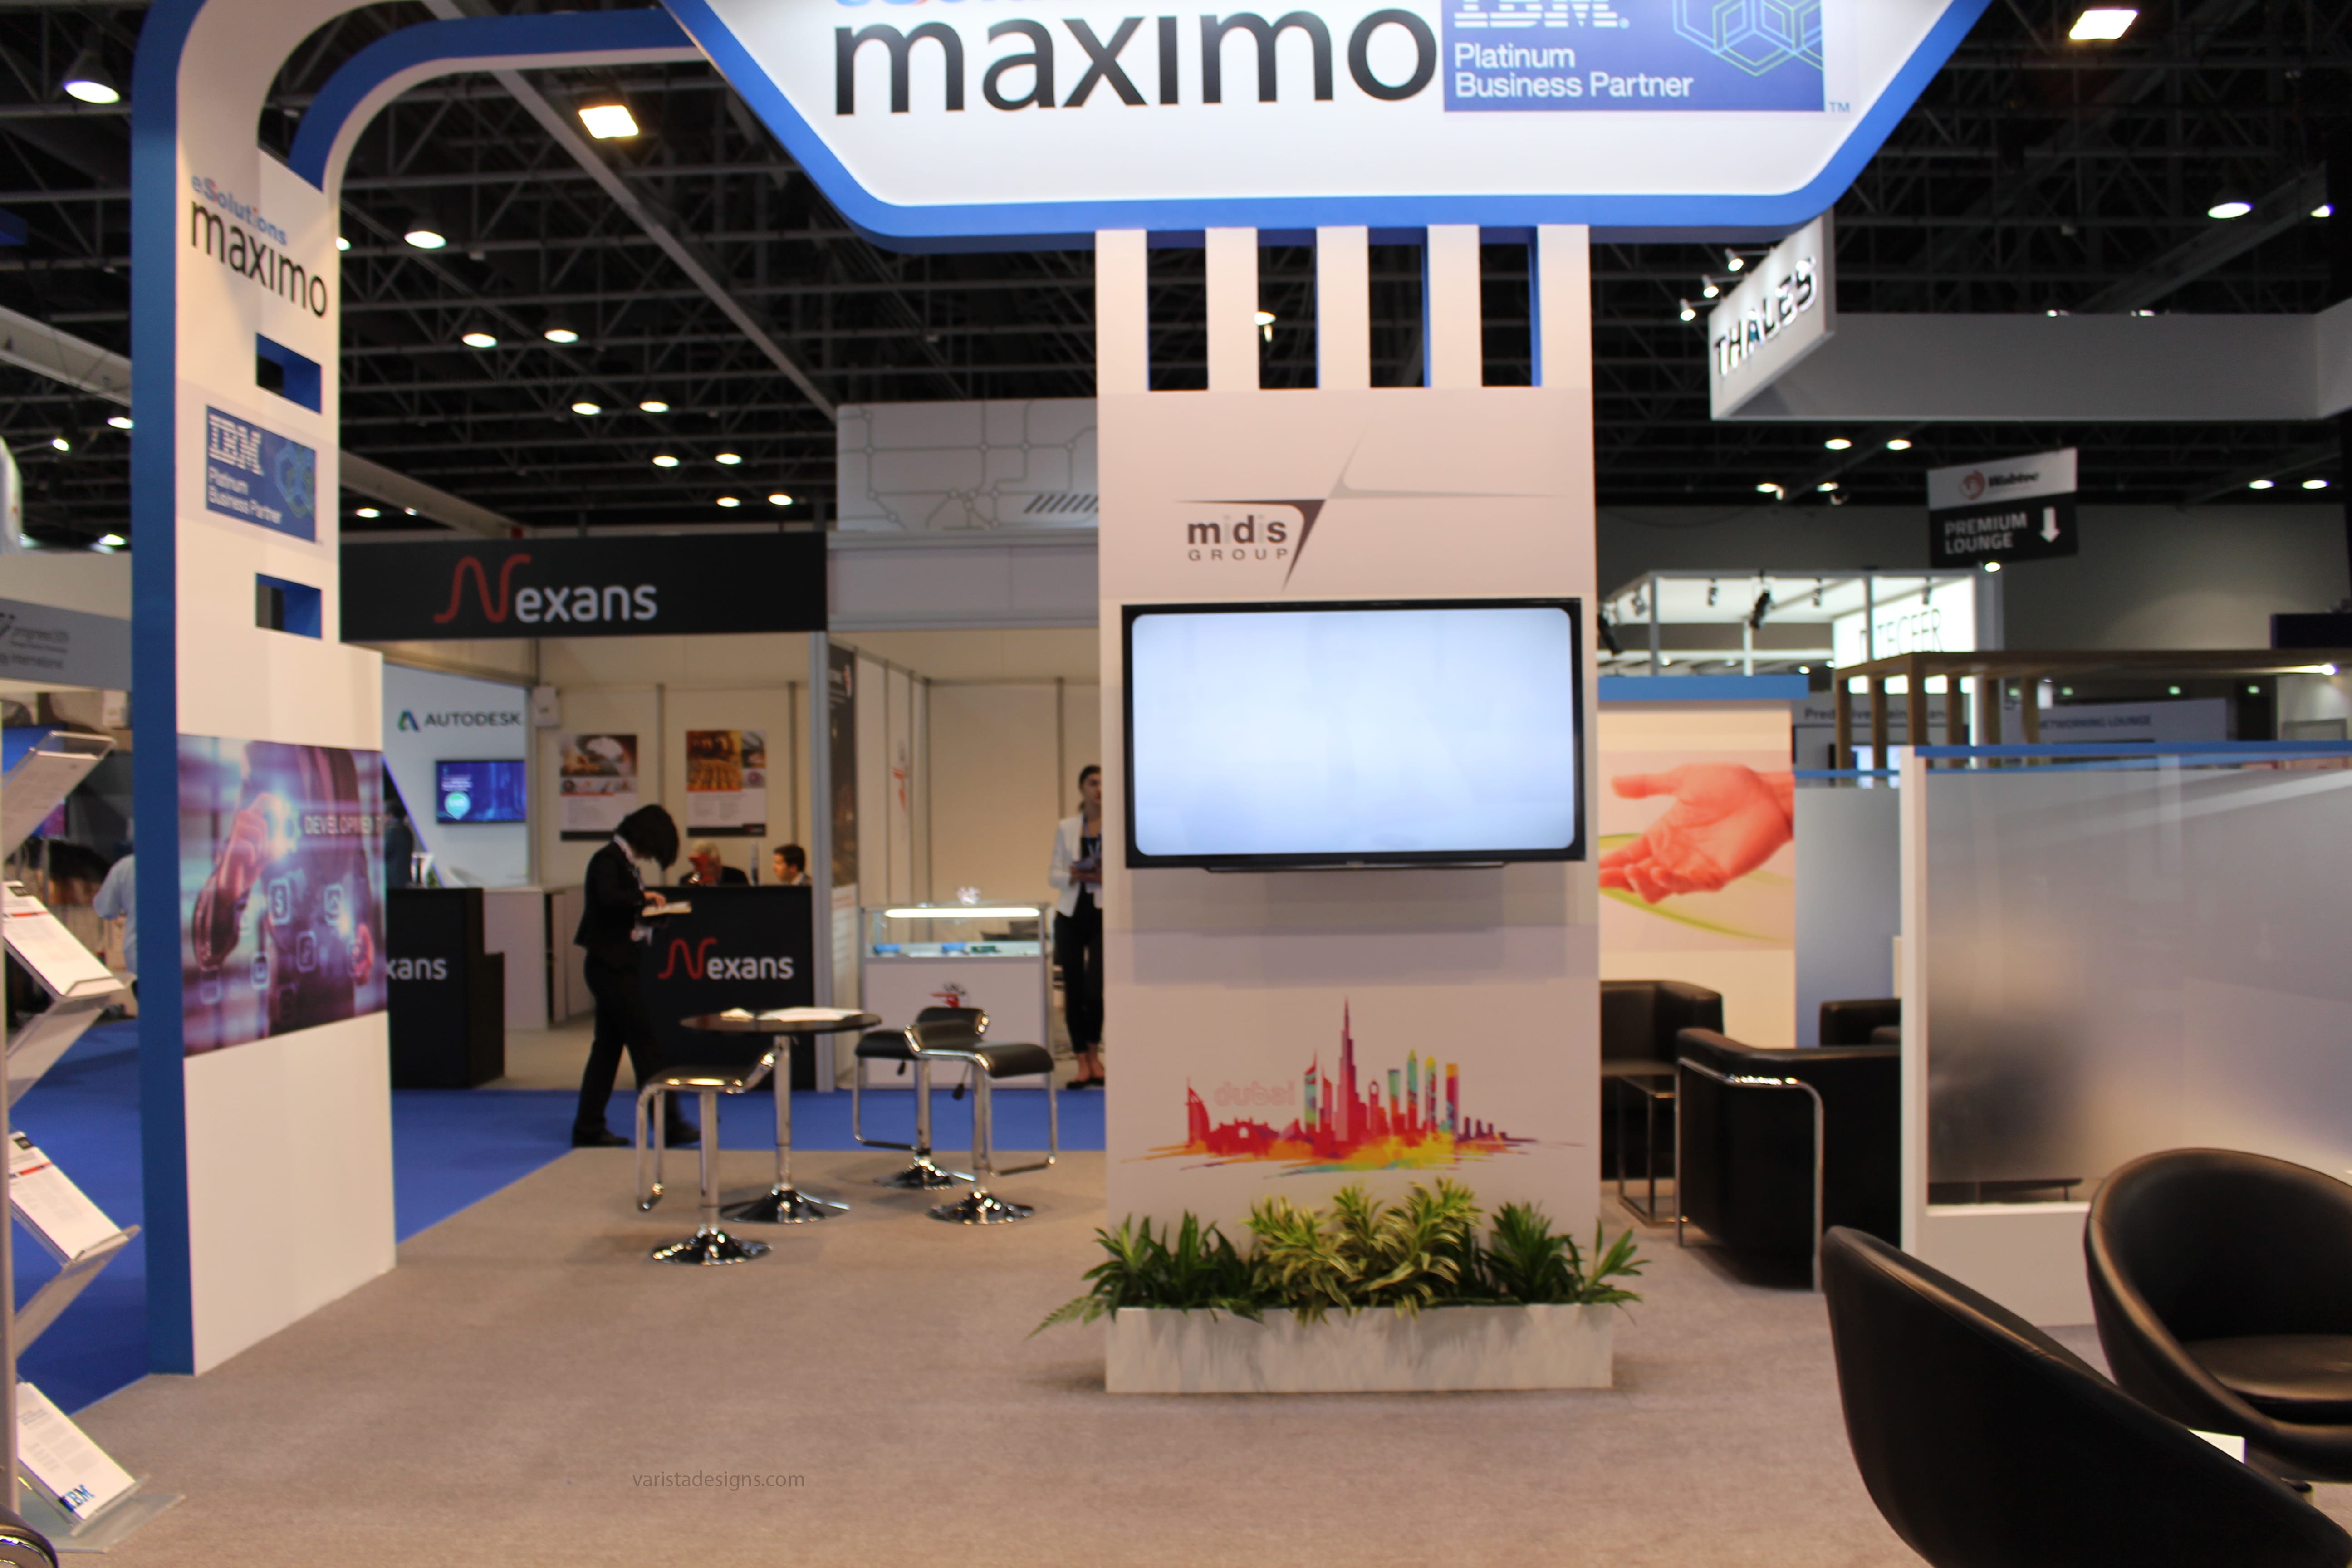 eSolutions Maximo exhibition stand builders MER-2017 